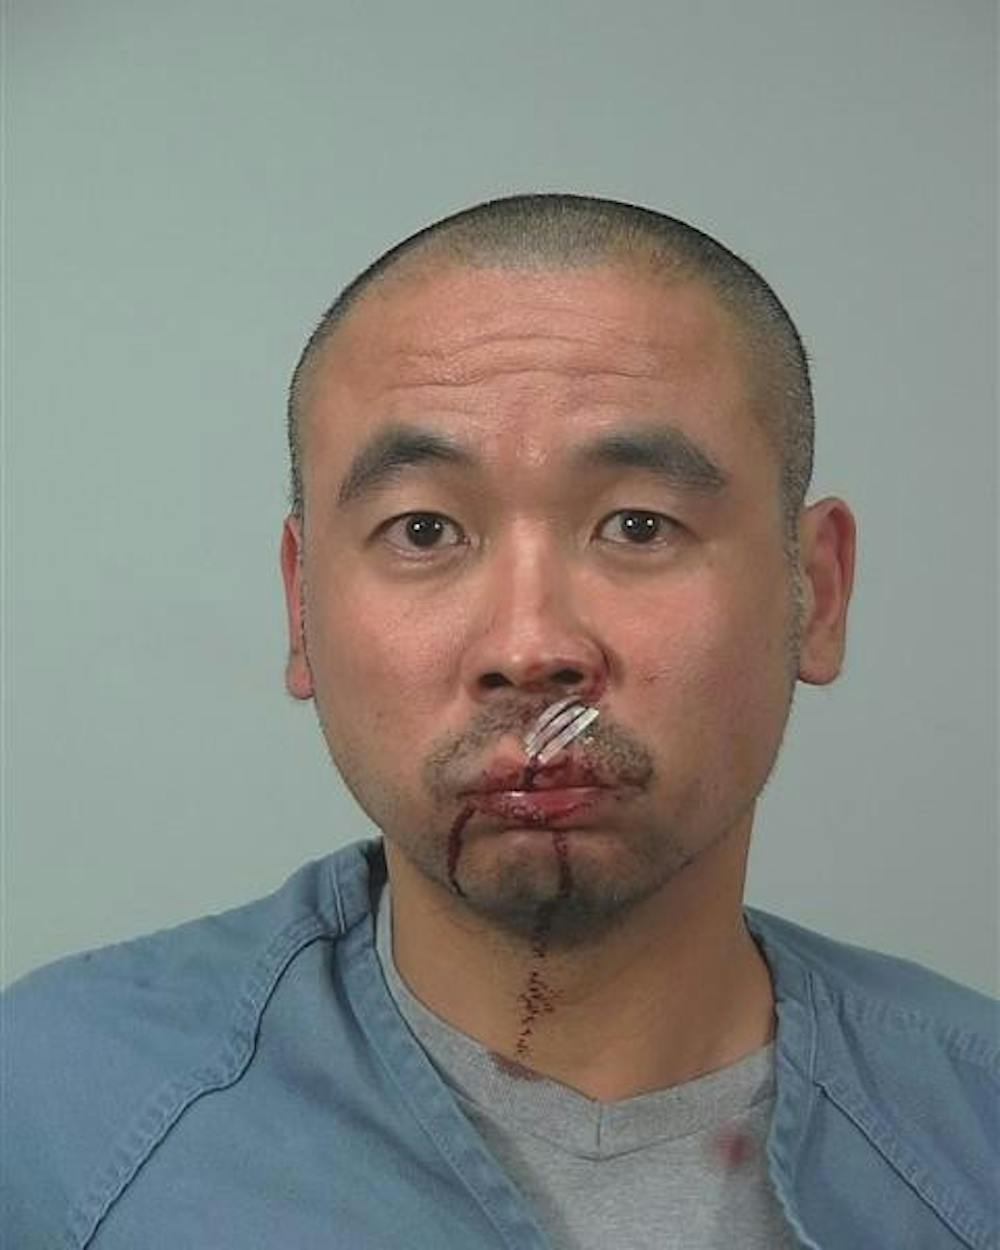 Tino B. Luu, 38, was arrested Thursday after attempting to rob a student on State Street.